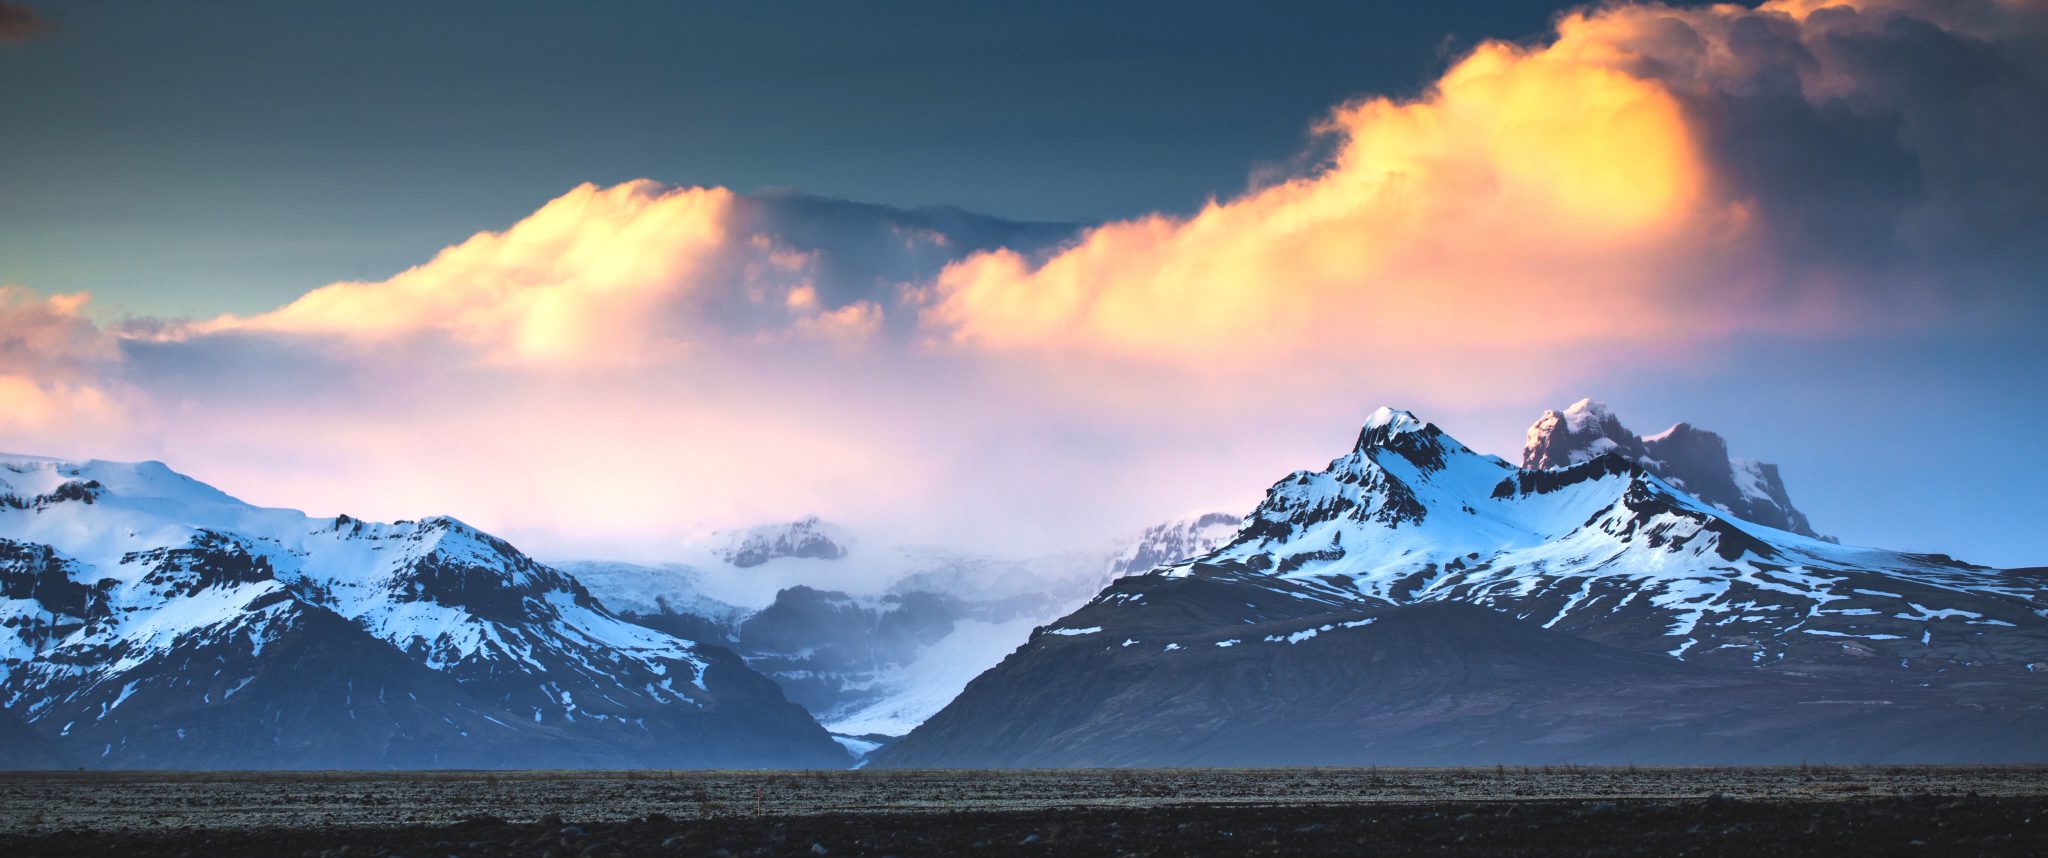 Sunset Panorama of snowy mountains